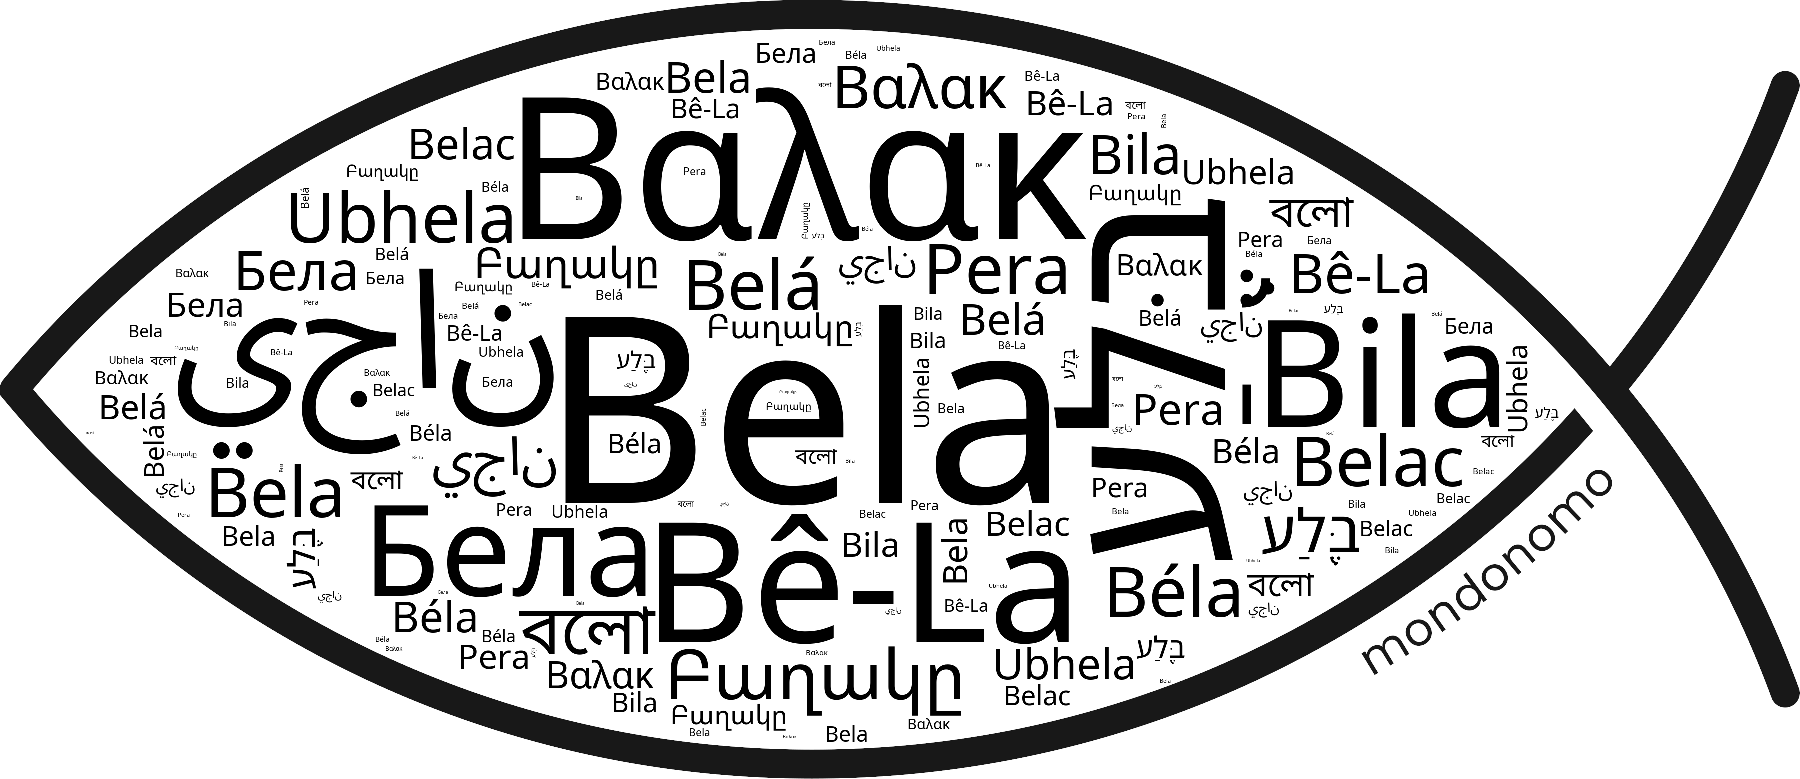 Name Bela in the world's Bibles